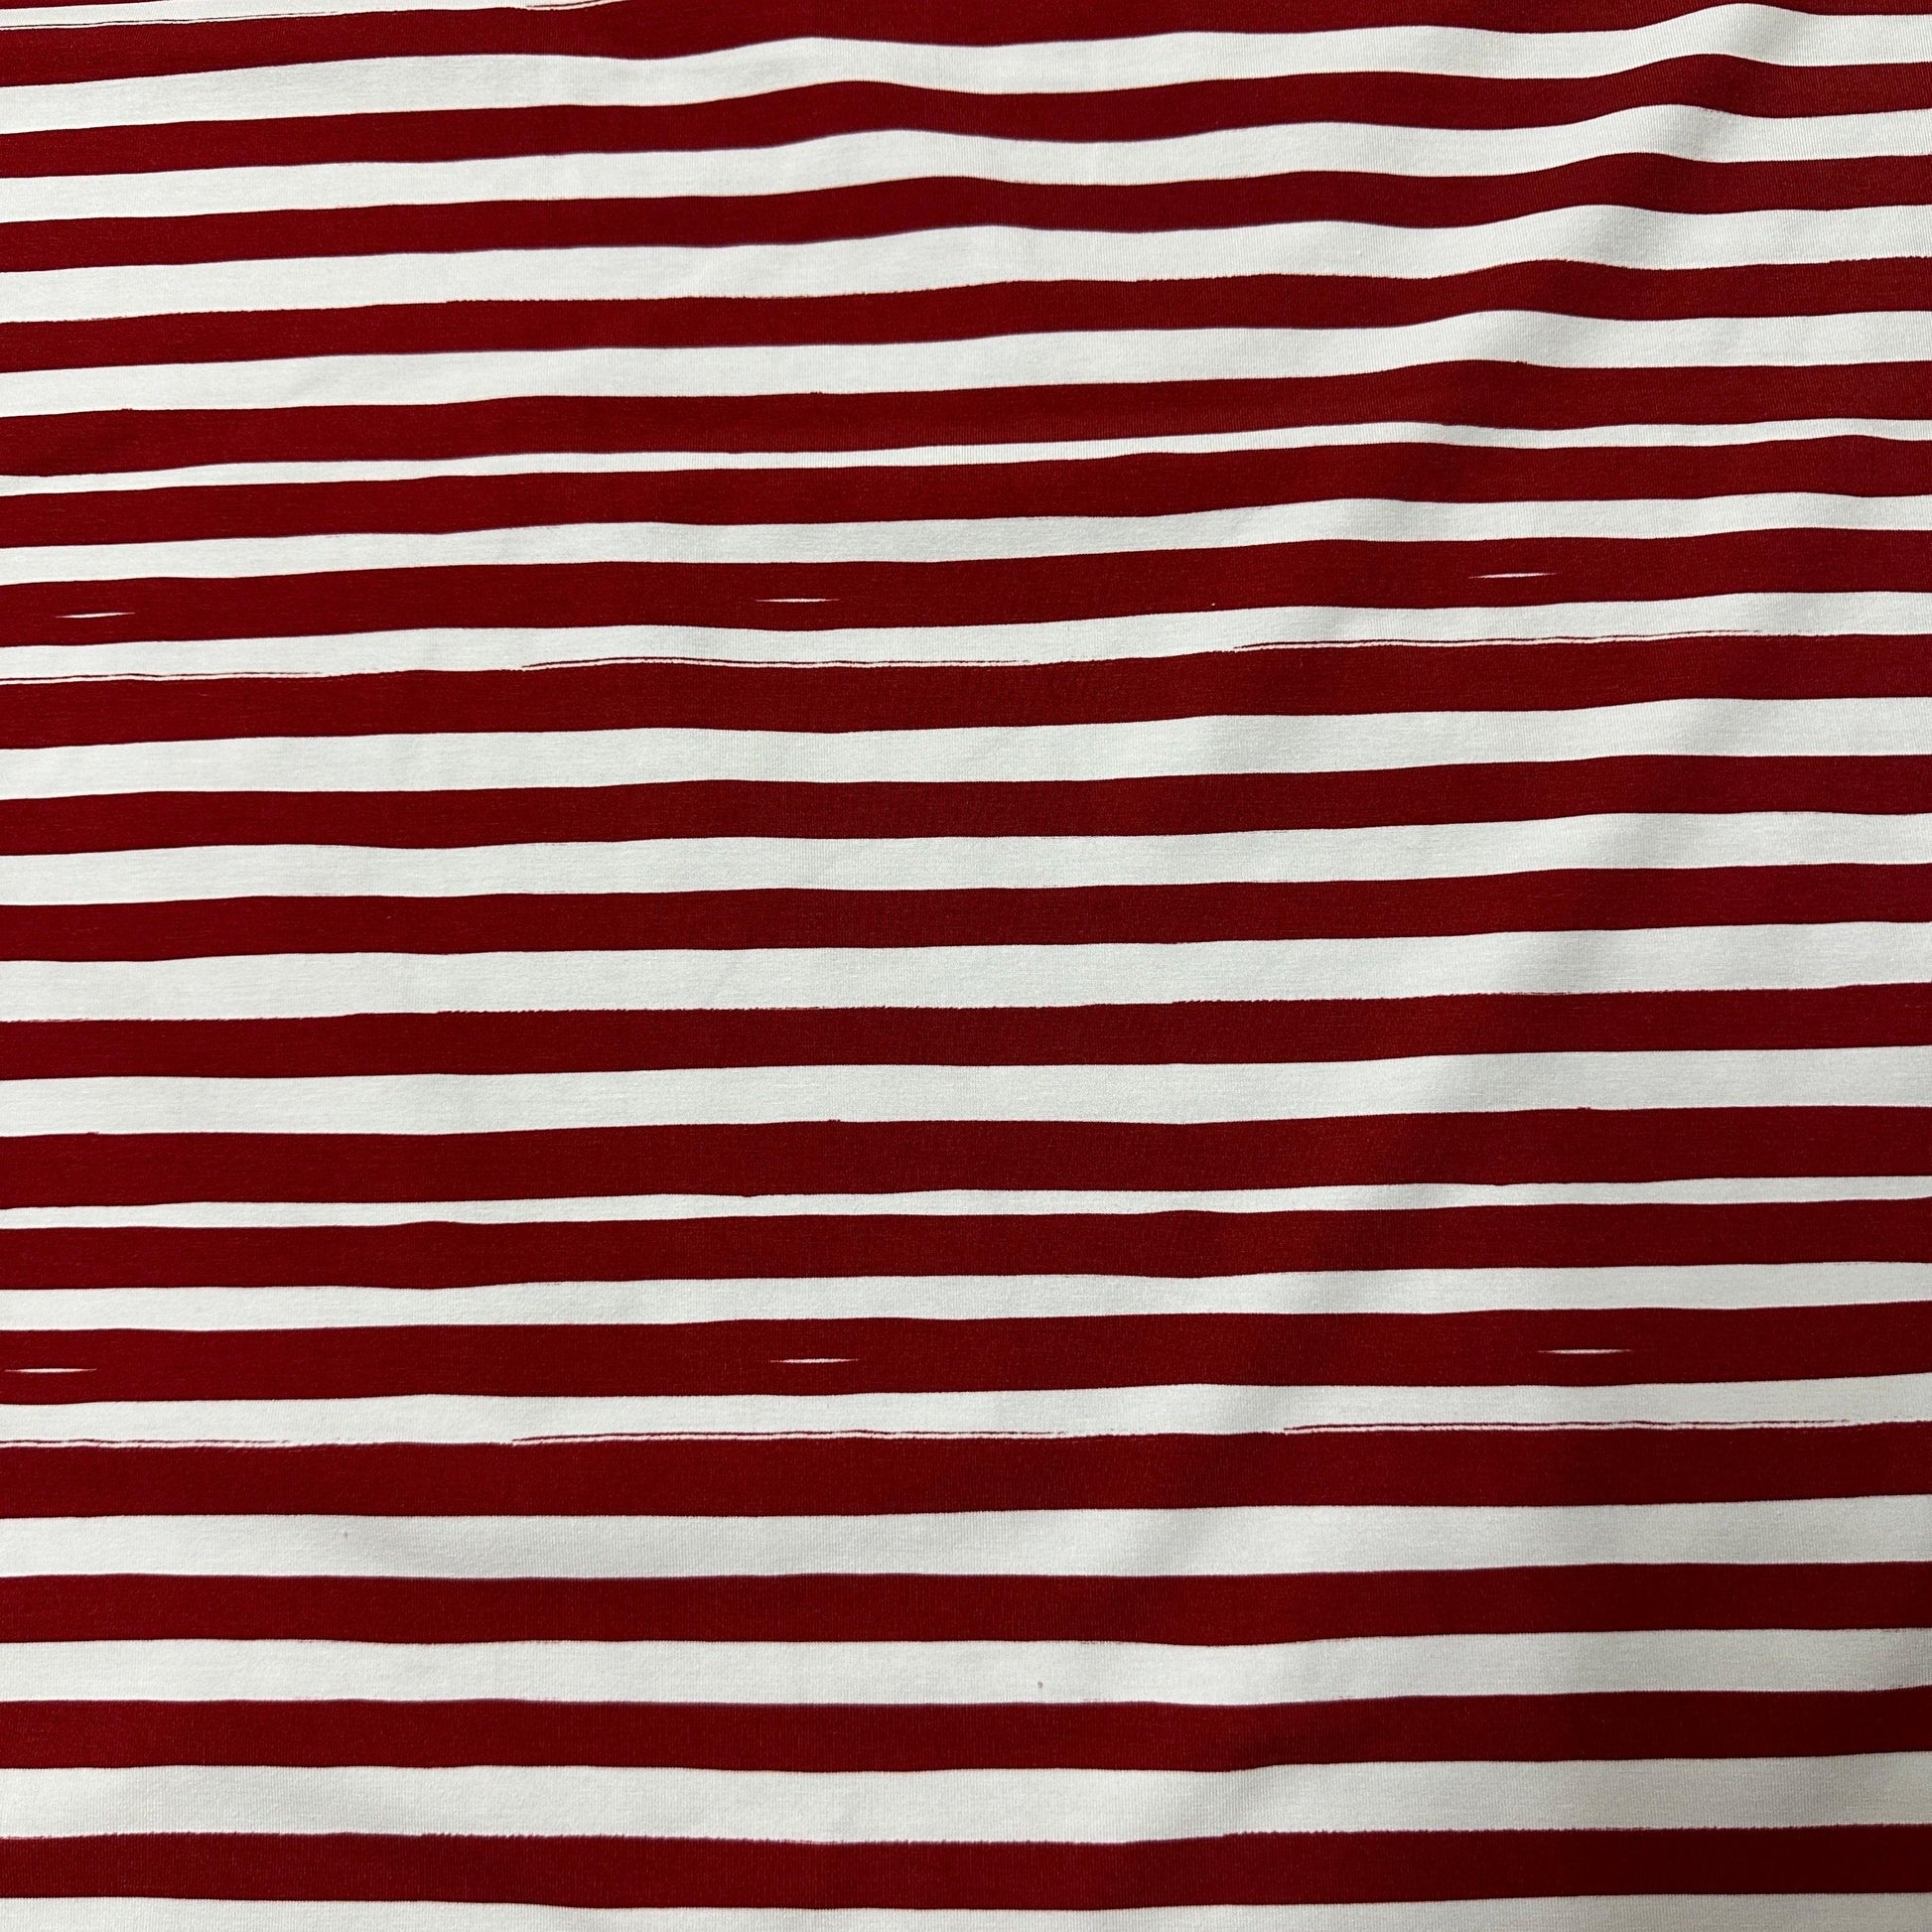 Red and White Stripes on Bamboo/Spandex Jersey Fabric - Nature's Fabrics